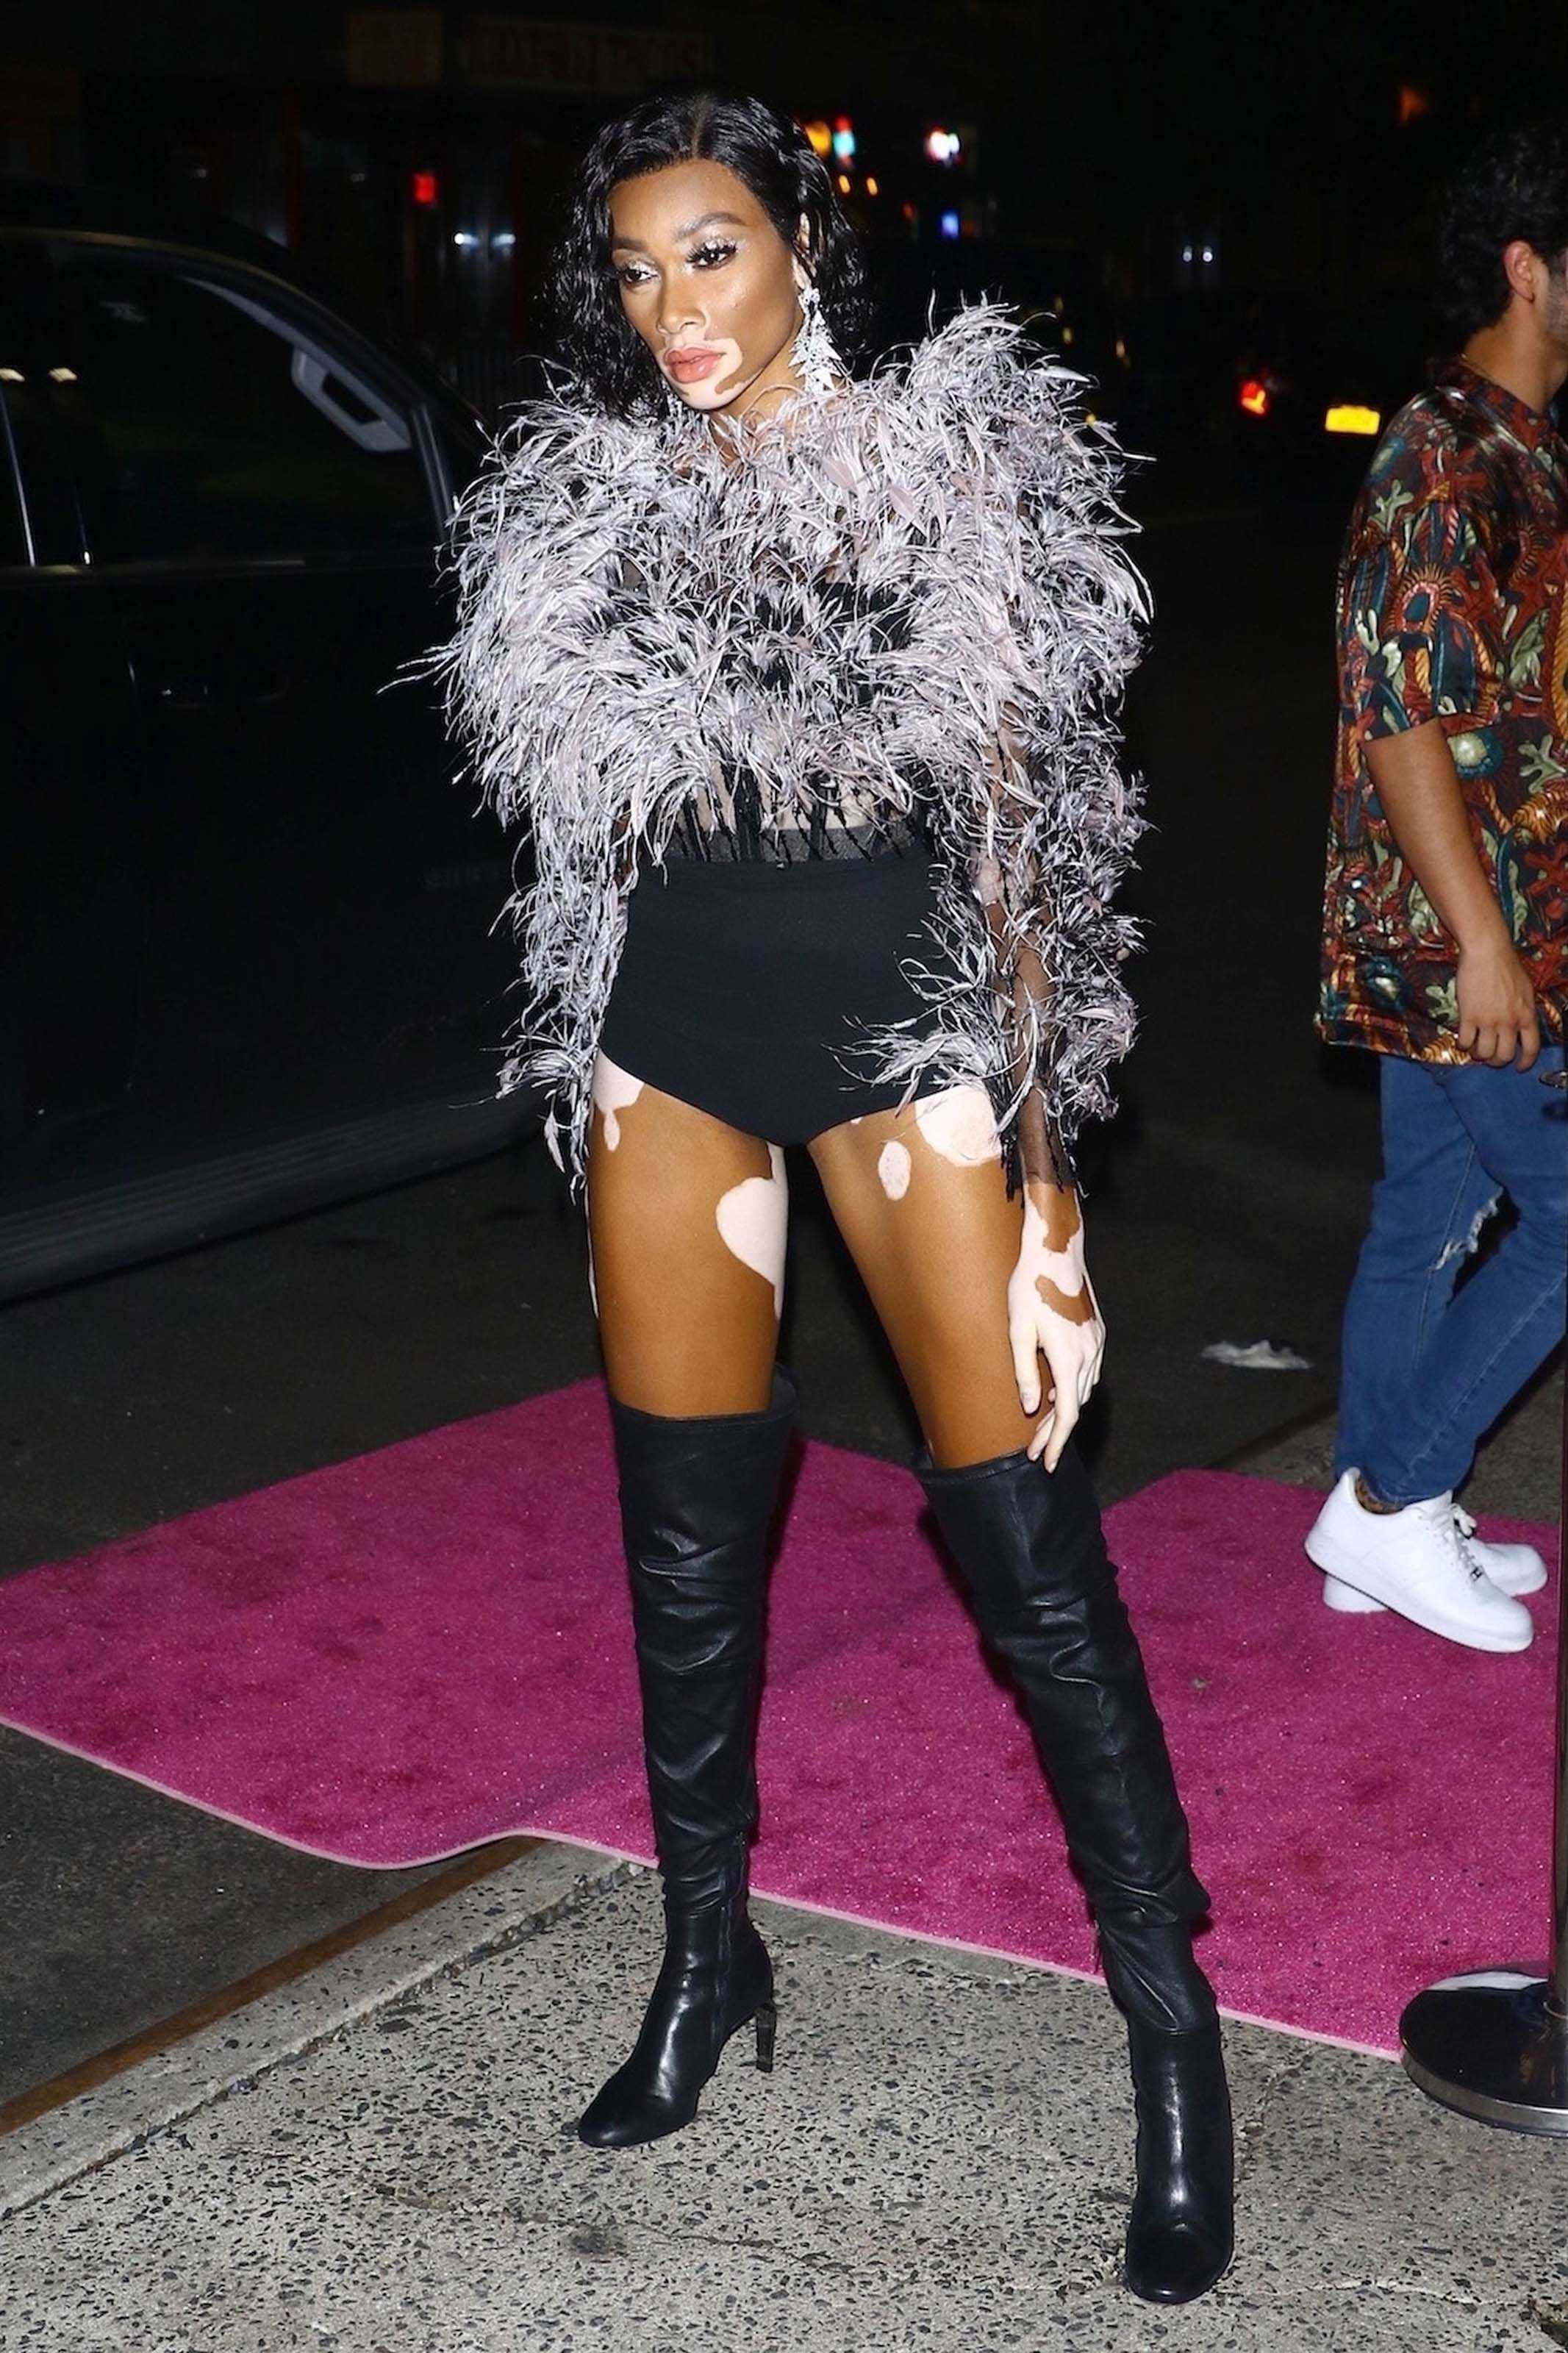 Winnie Harlow arriving at JLo’s VMA Afterparty